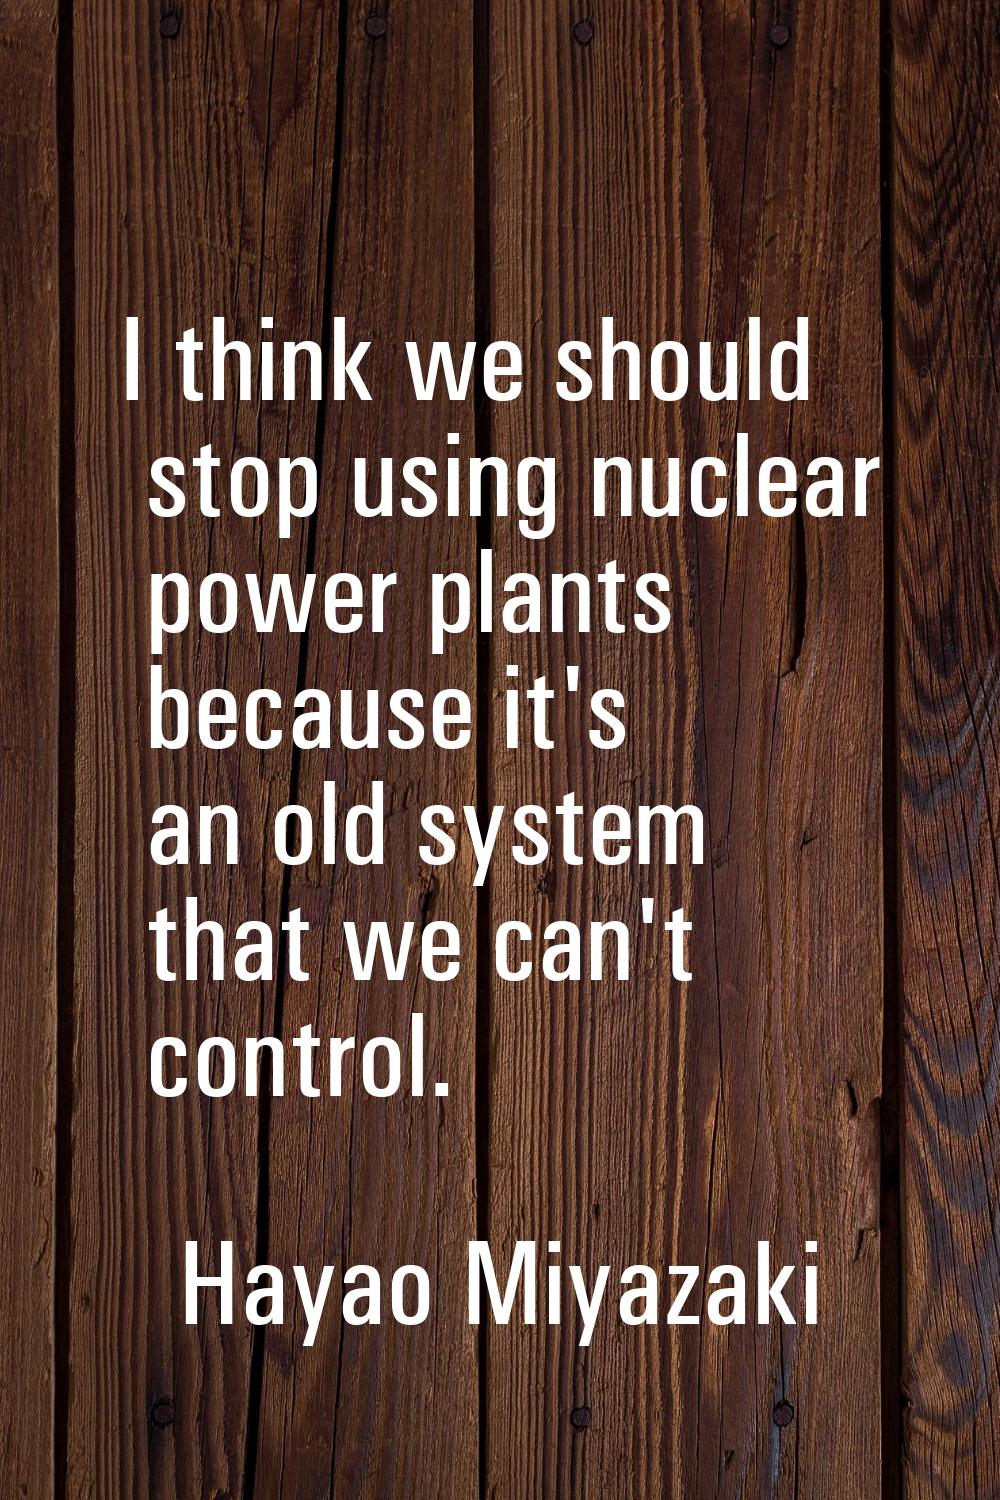 I think we should stop using nuclear power plants because it's an old system that we can't control.